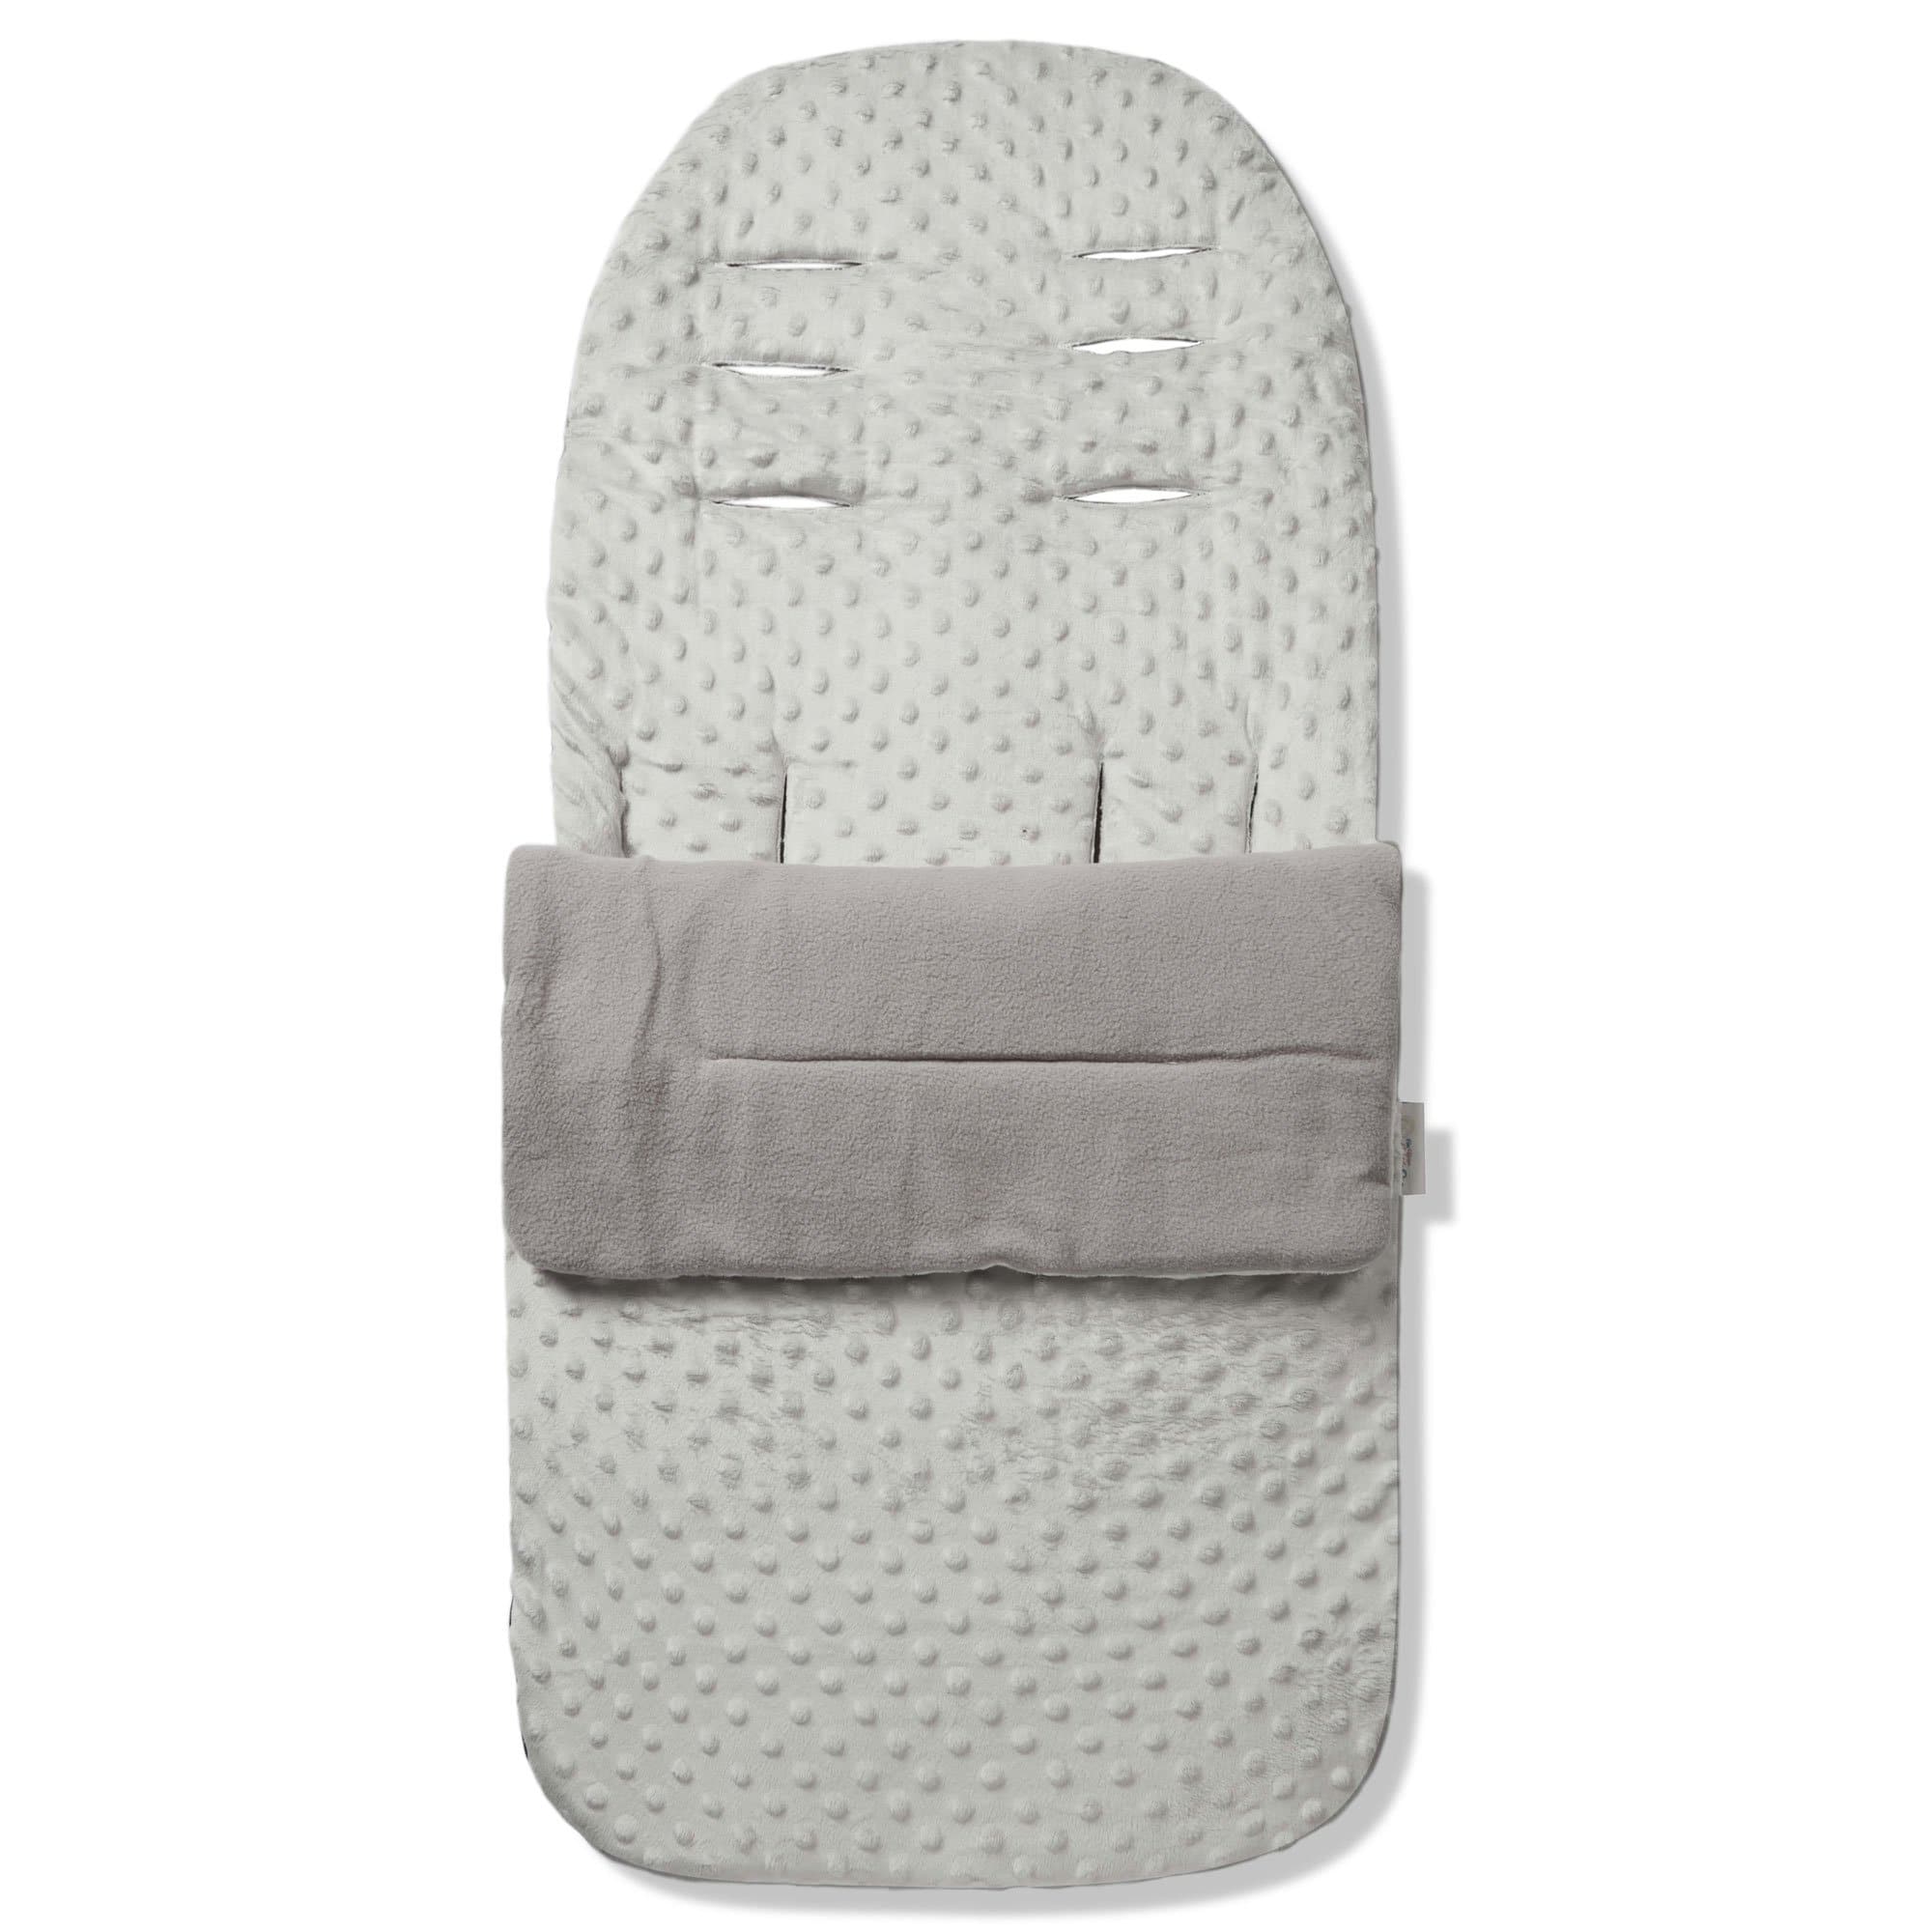 Dimple Footmuff / Cosy Toes Compatible with Bebe 9 - For Your Little One